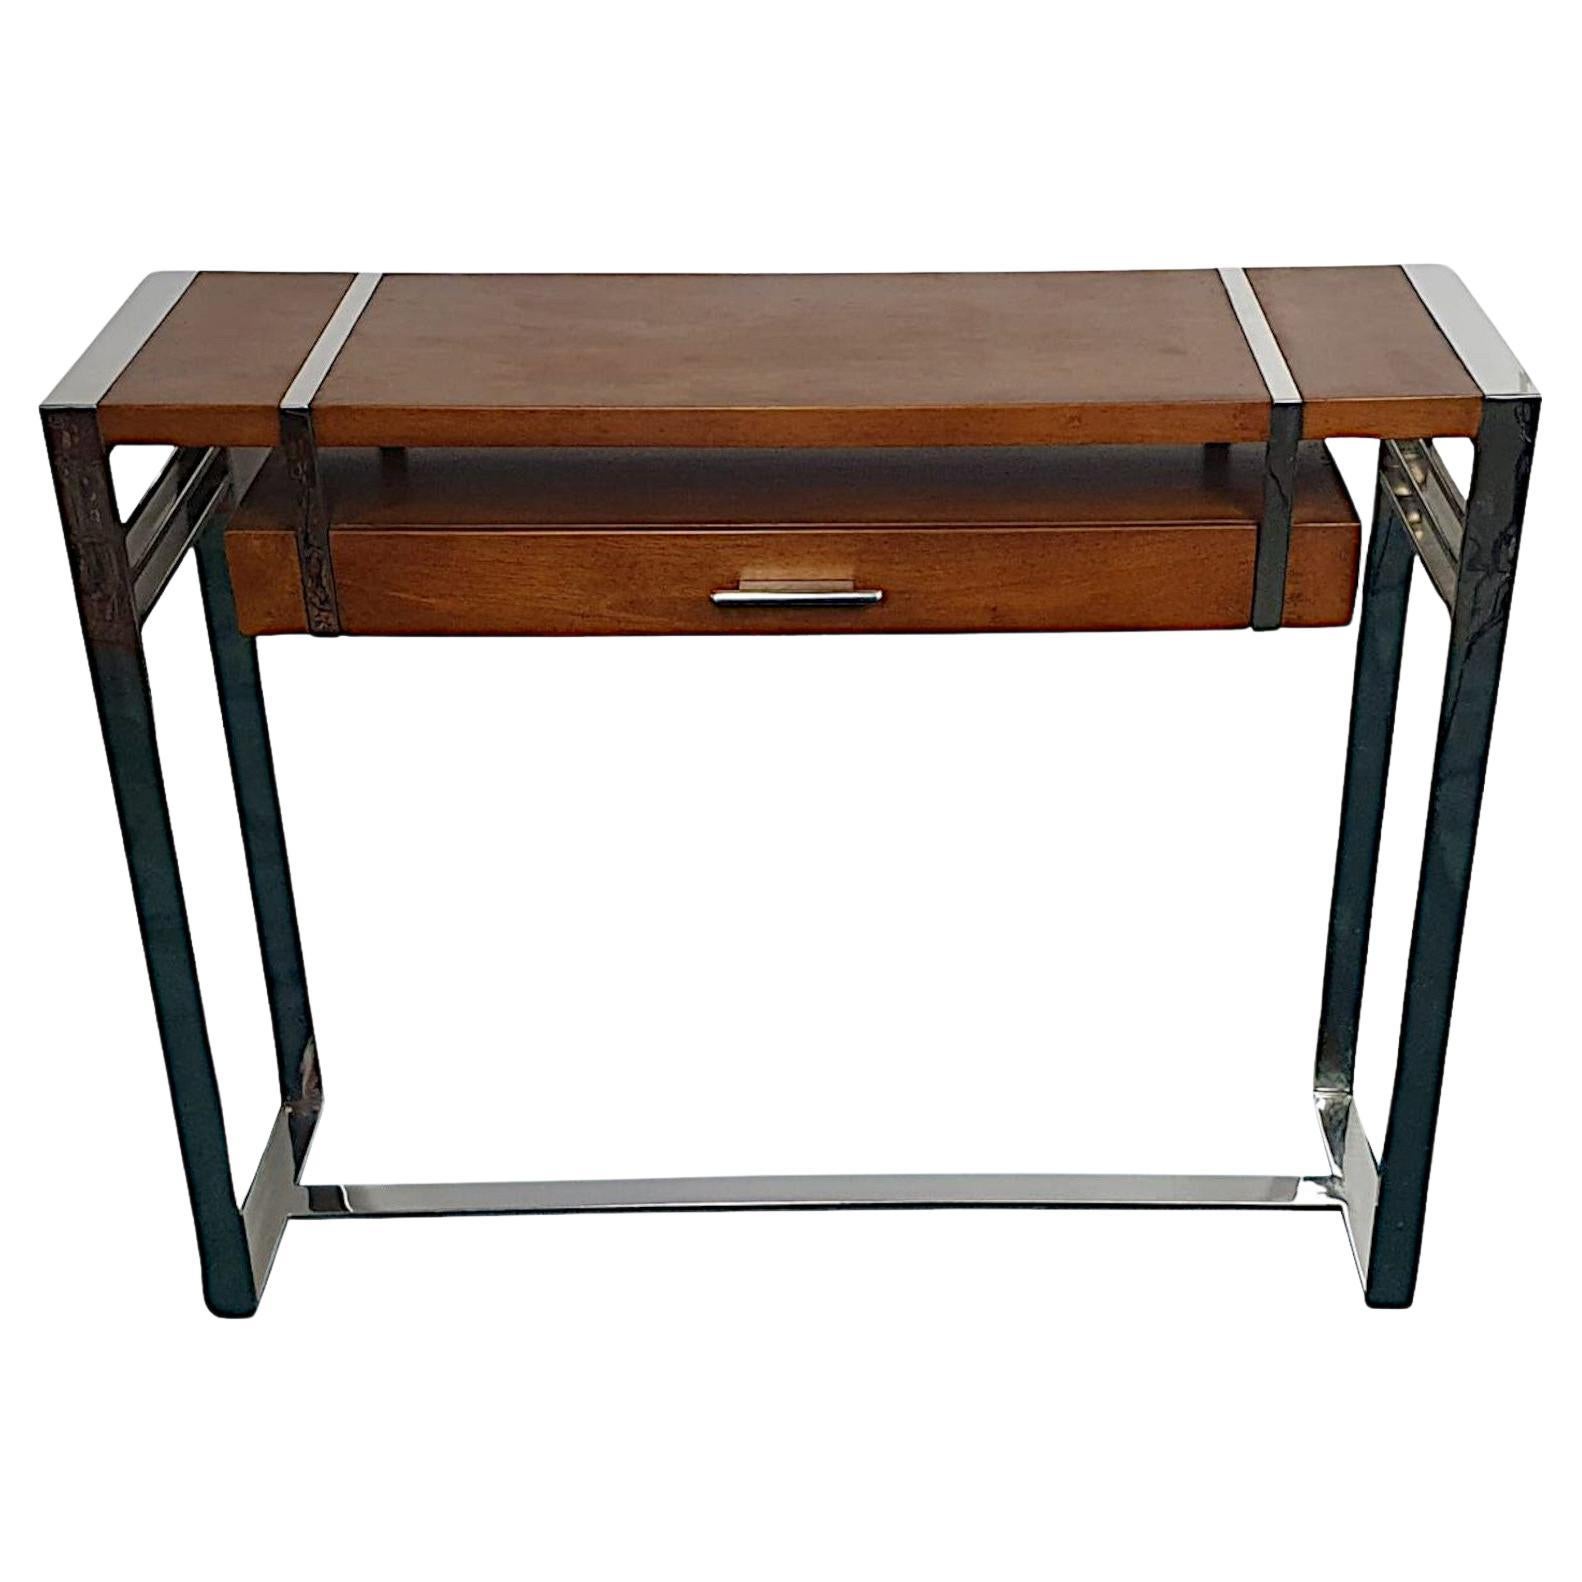 A Very Fine 20th Century Art Deco Design Cherrywood and Chrome Console Table For Sale